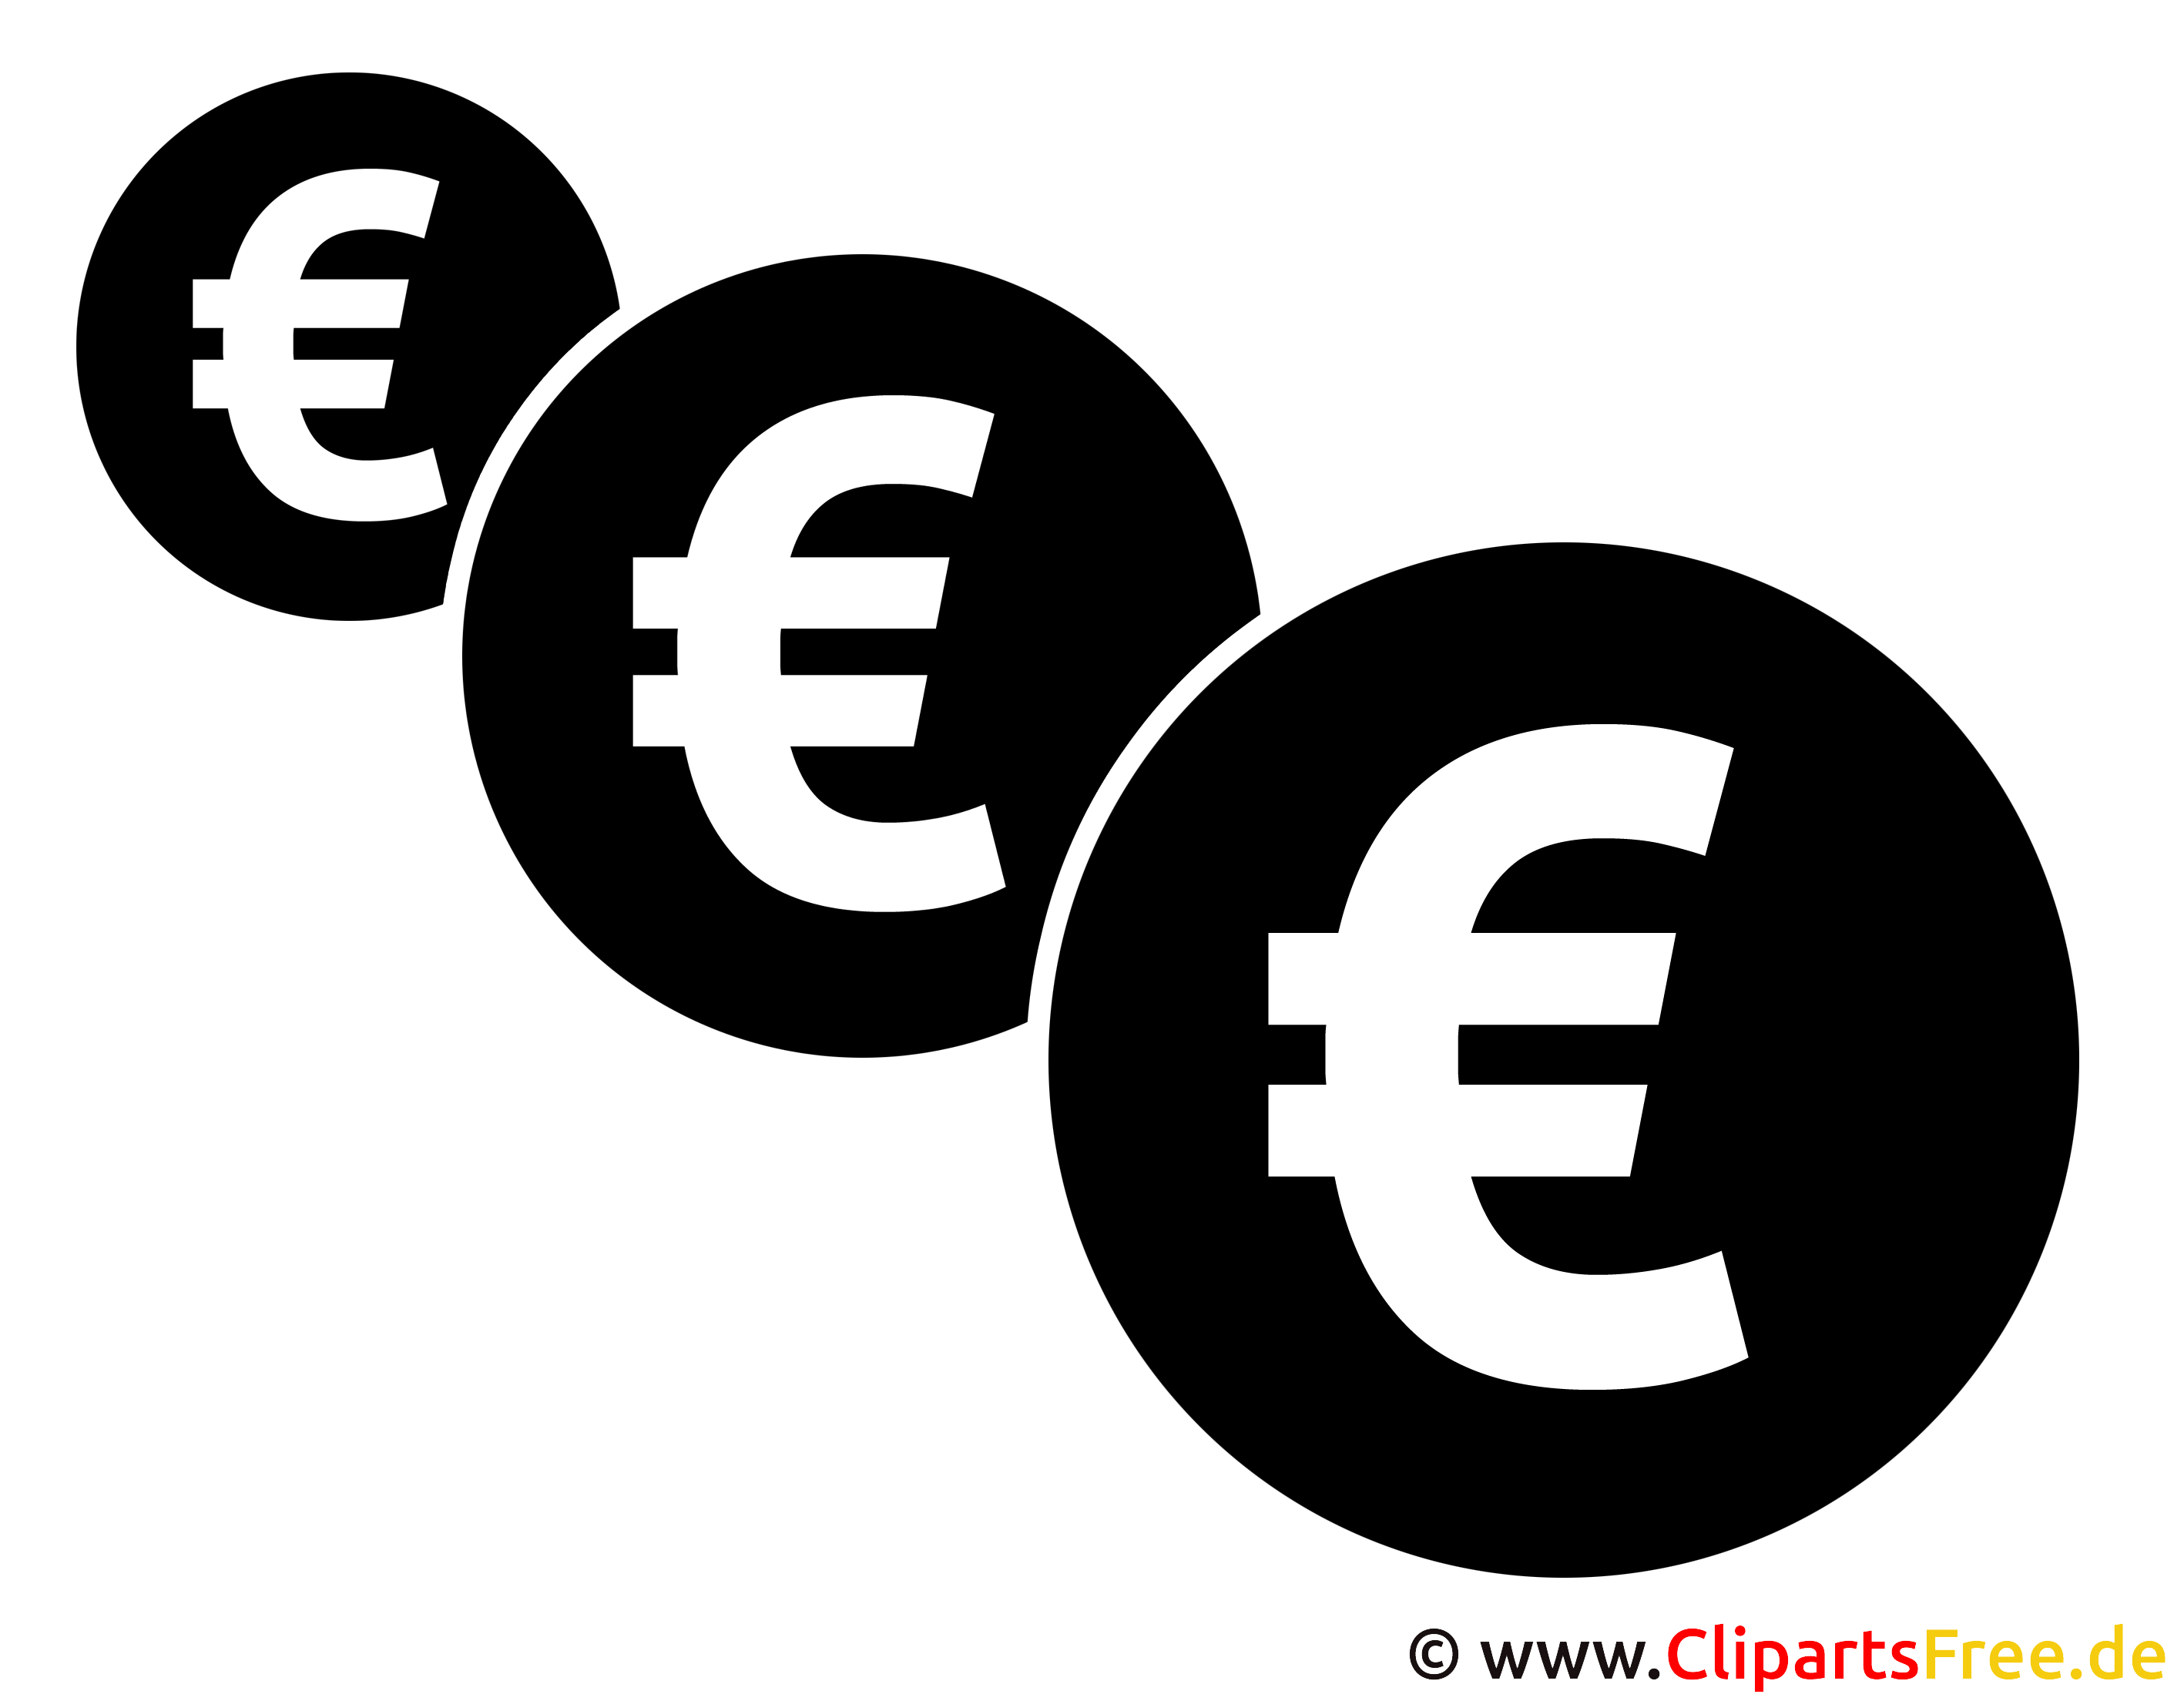 free clipart euro sign - photo #47